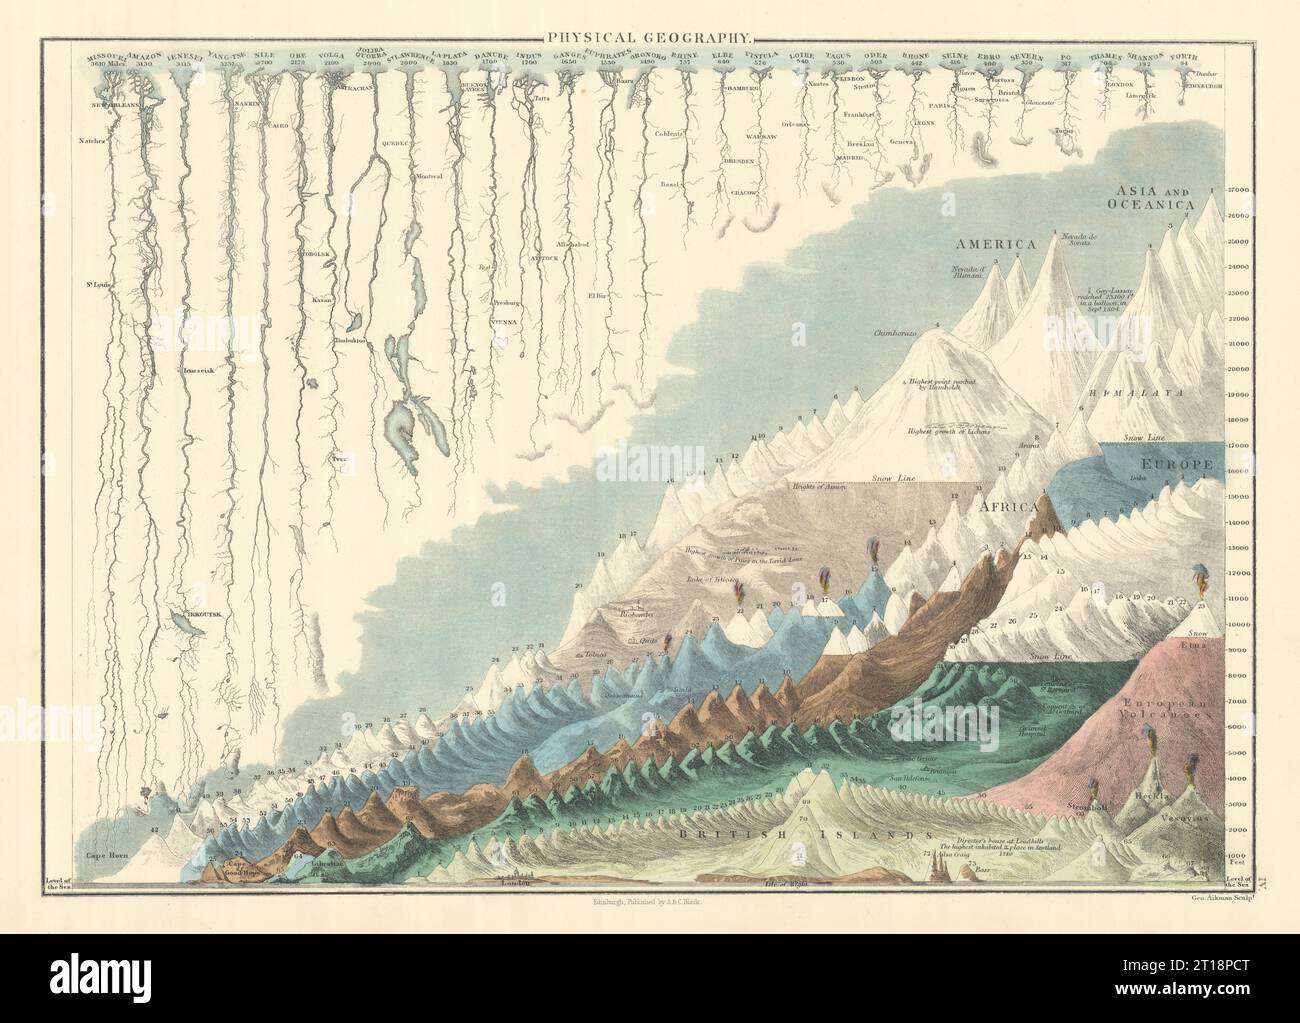 Rivers and mountains. Physical geography. World. GEORGE AIKMAN 1854 old map Stock Photo